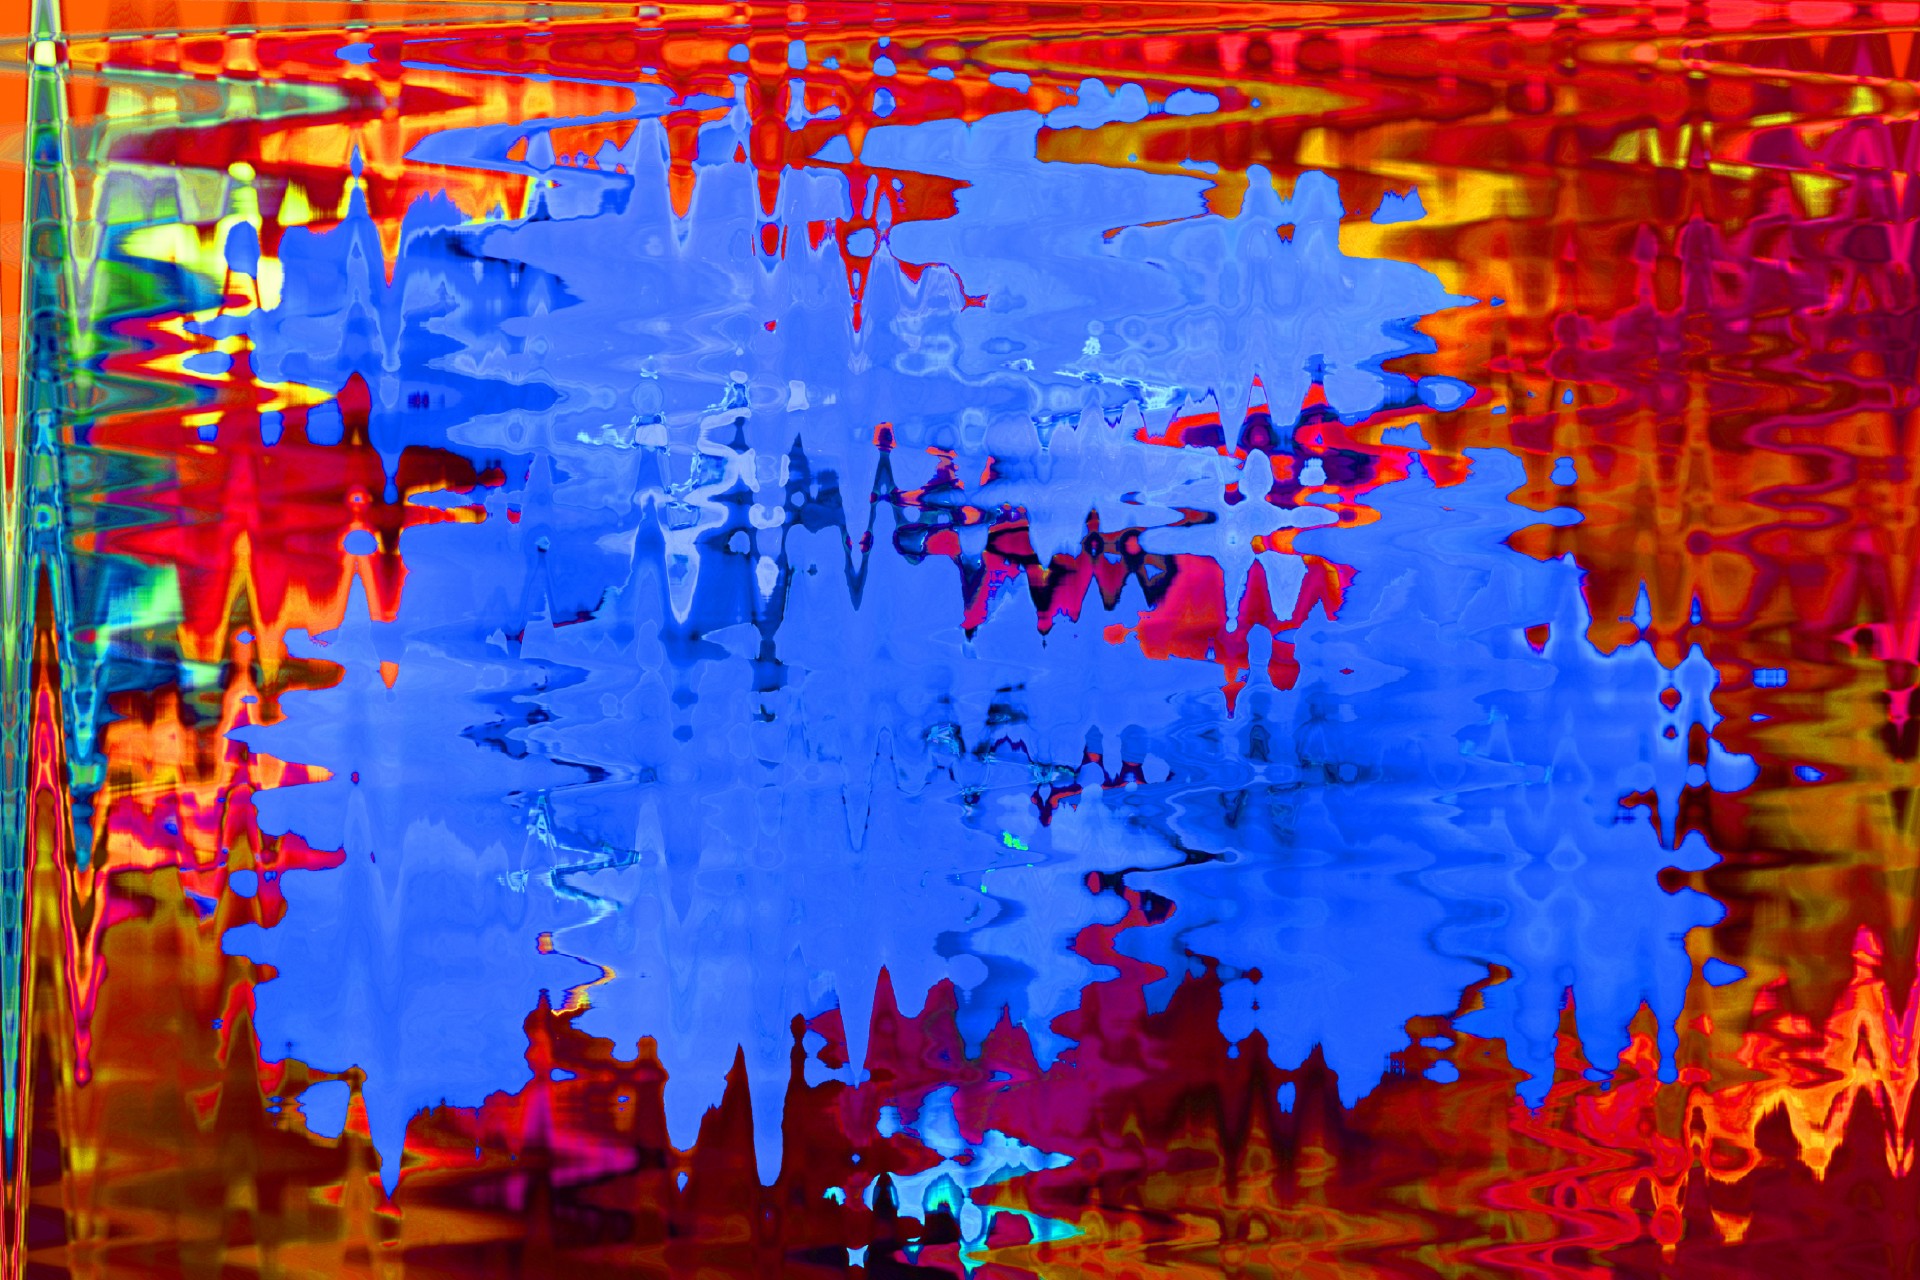 Colorat imagine abstract val